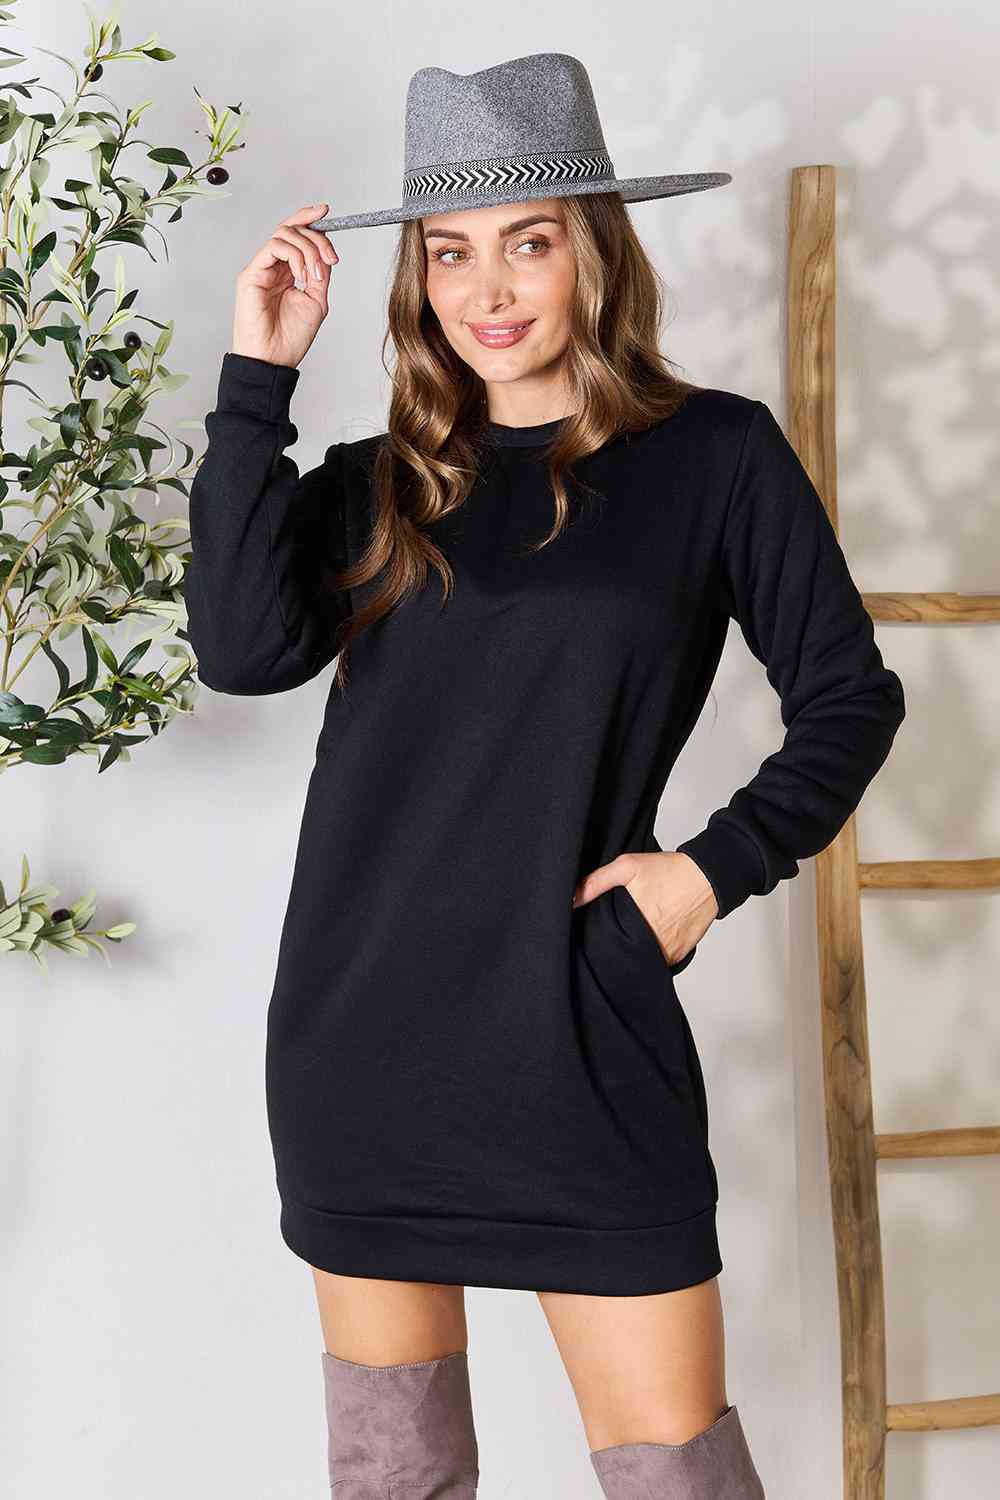 Double Take Round Neck Long Sleeve Mini Dress with Pockets